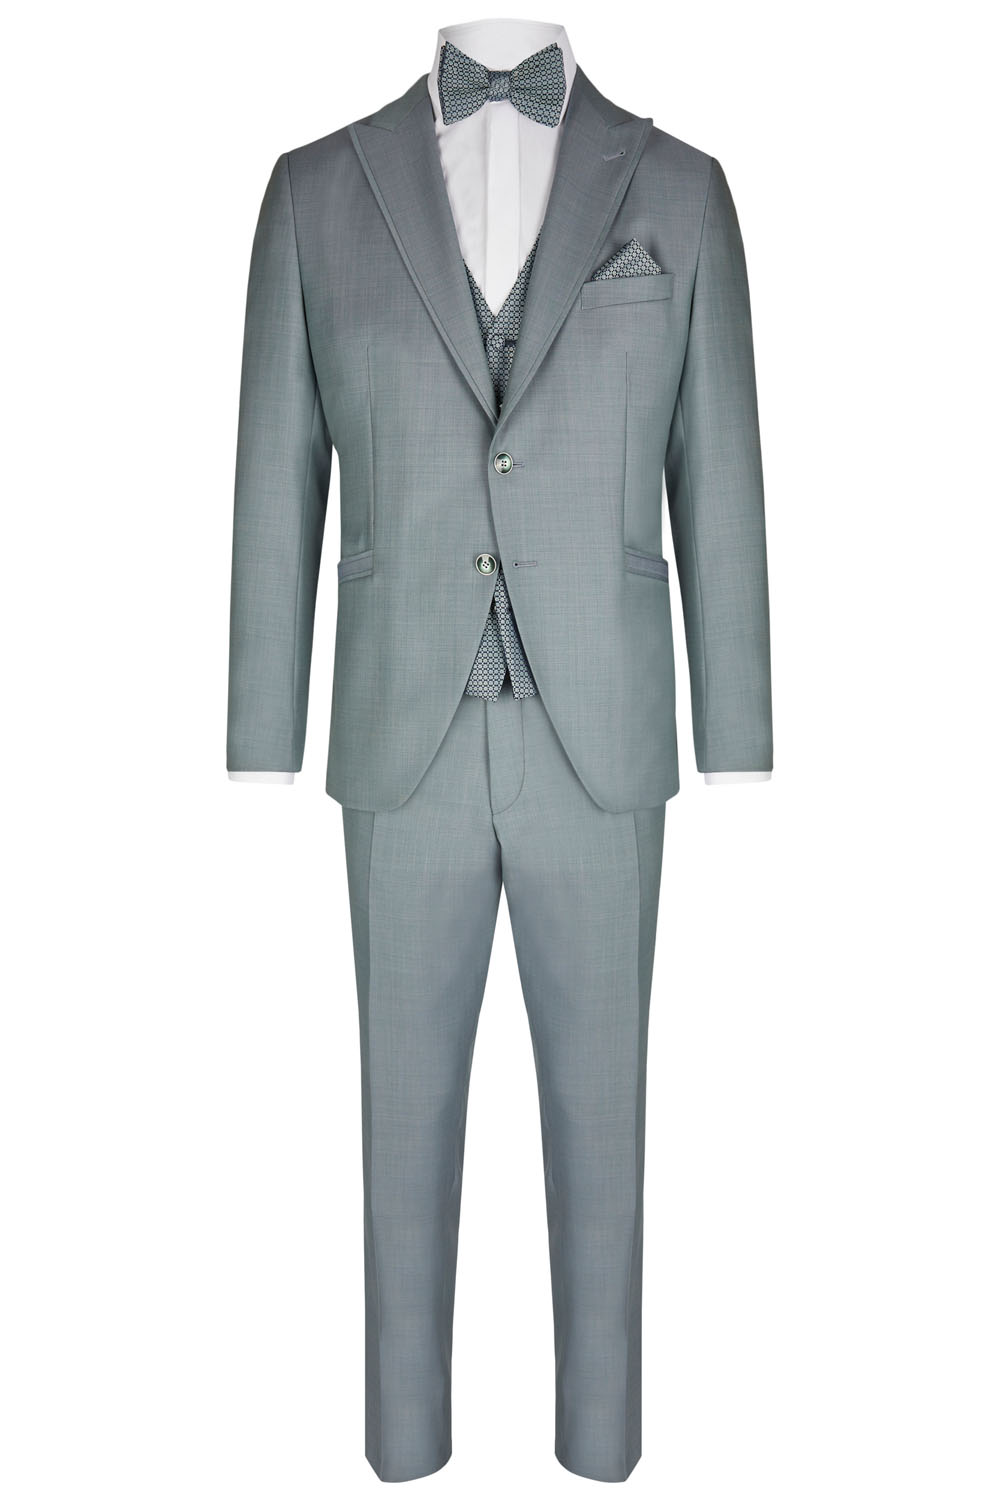 Blue Green 3 piece Wedding Suit - Tom Murphy's Formal and Menswear